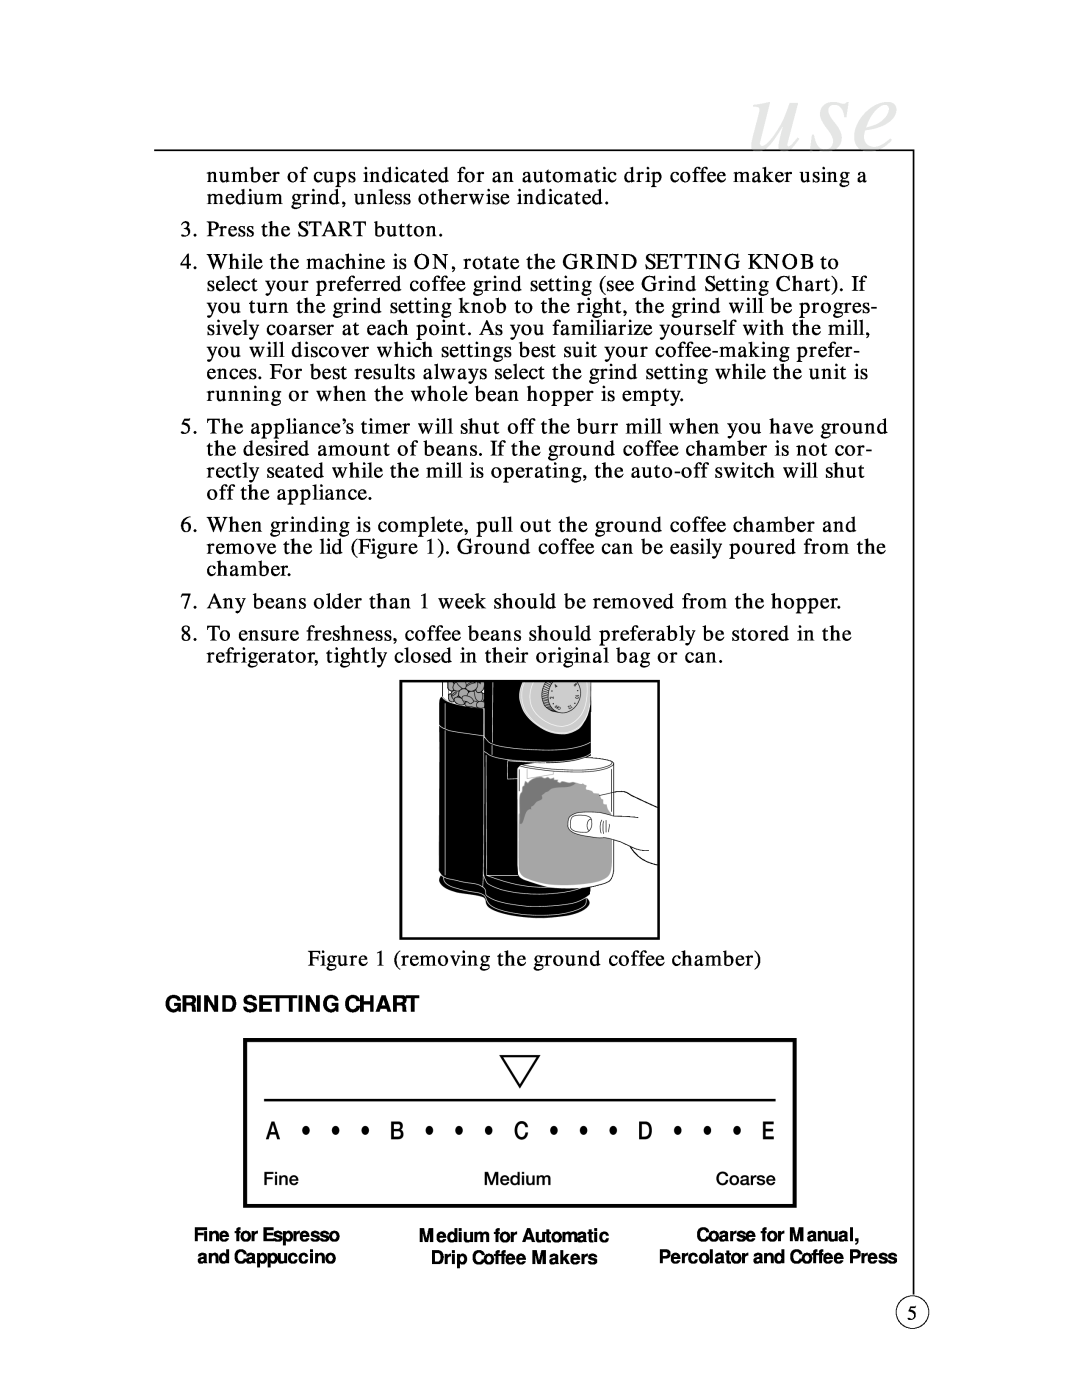 Oster 6389-33 user manual Grind Setting Chart 